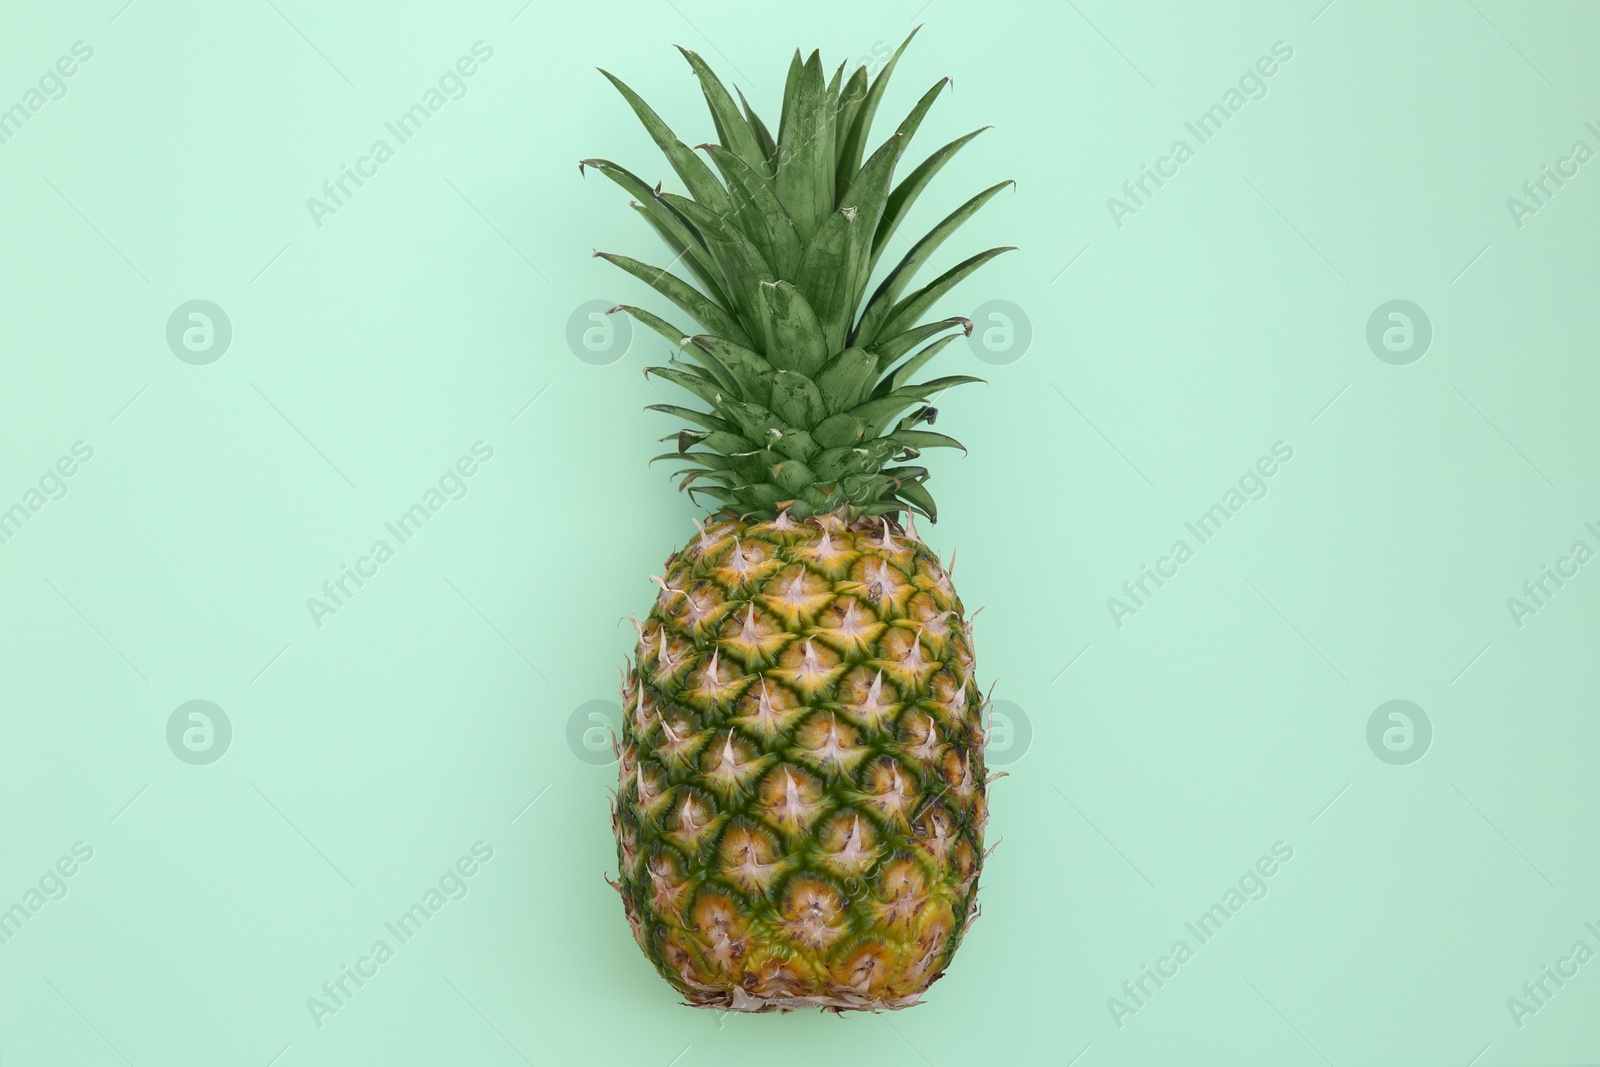 Photo of Whole ripe pineapple on light green background, top view